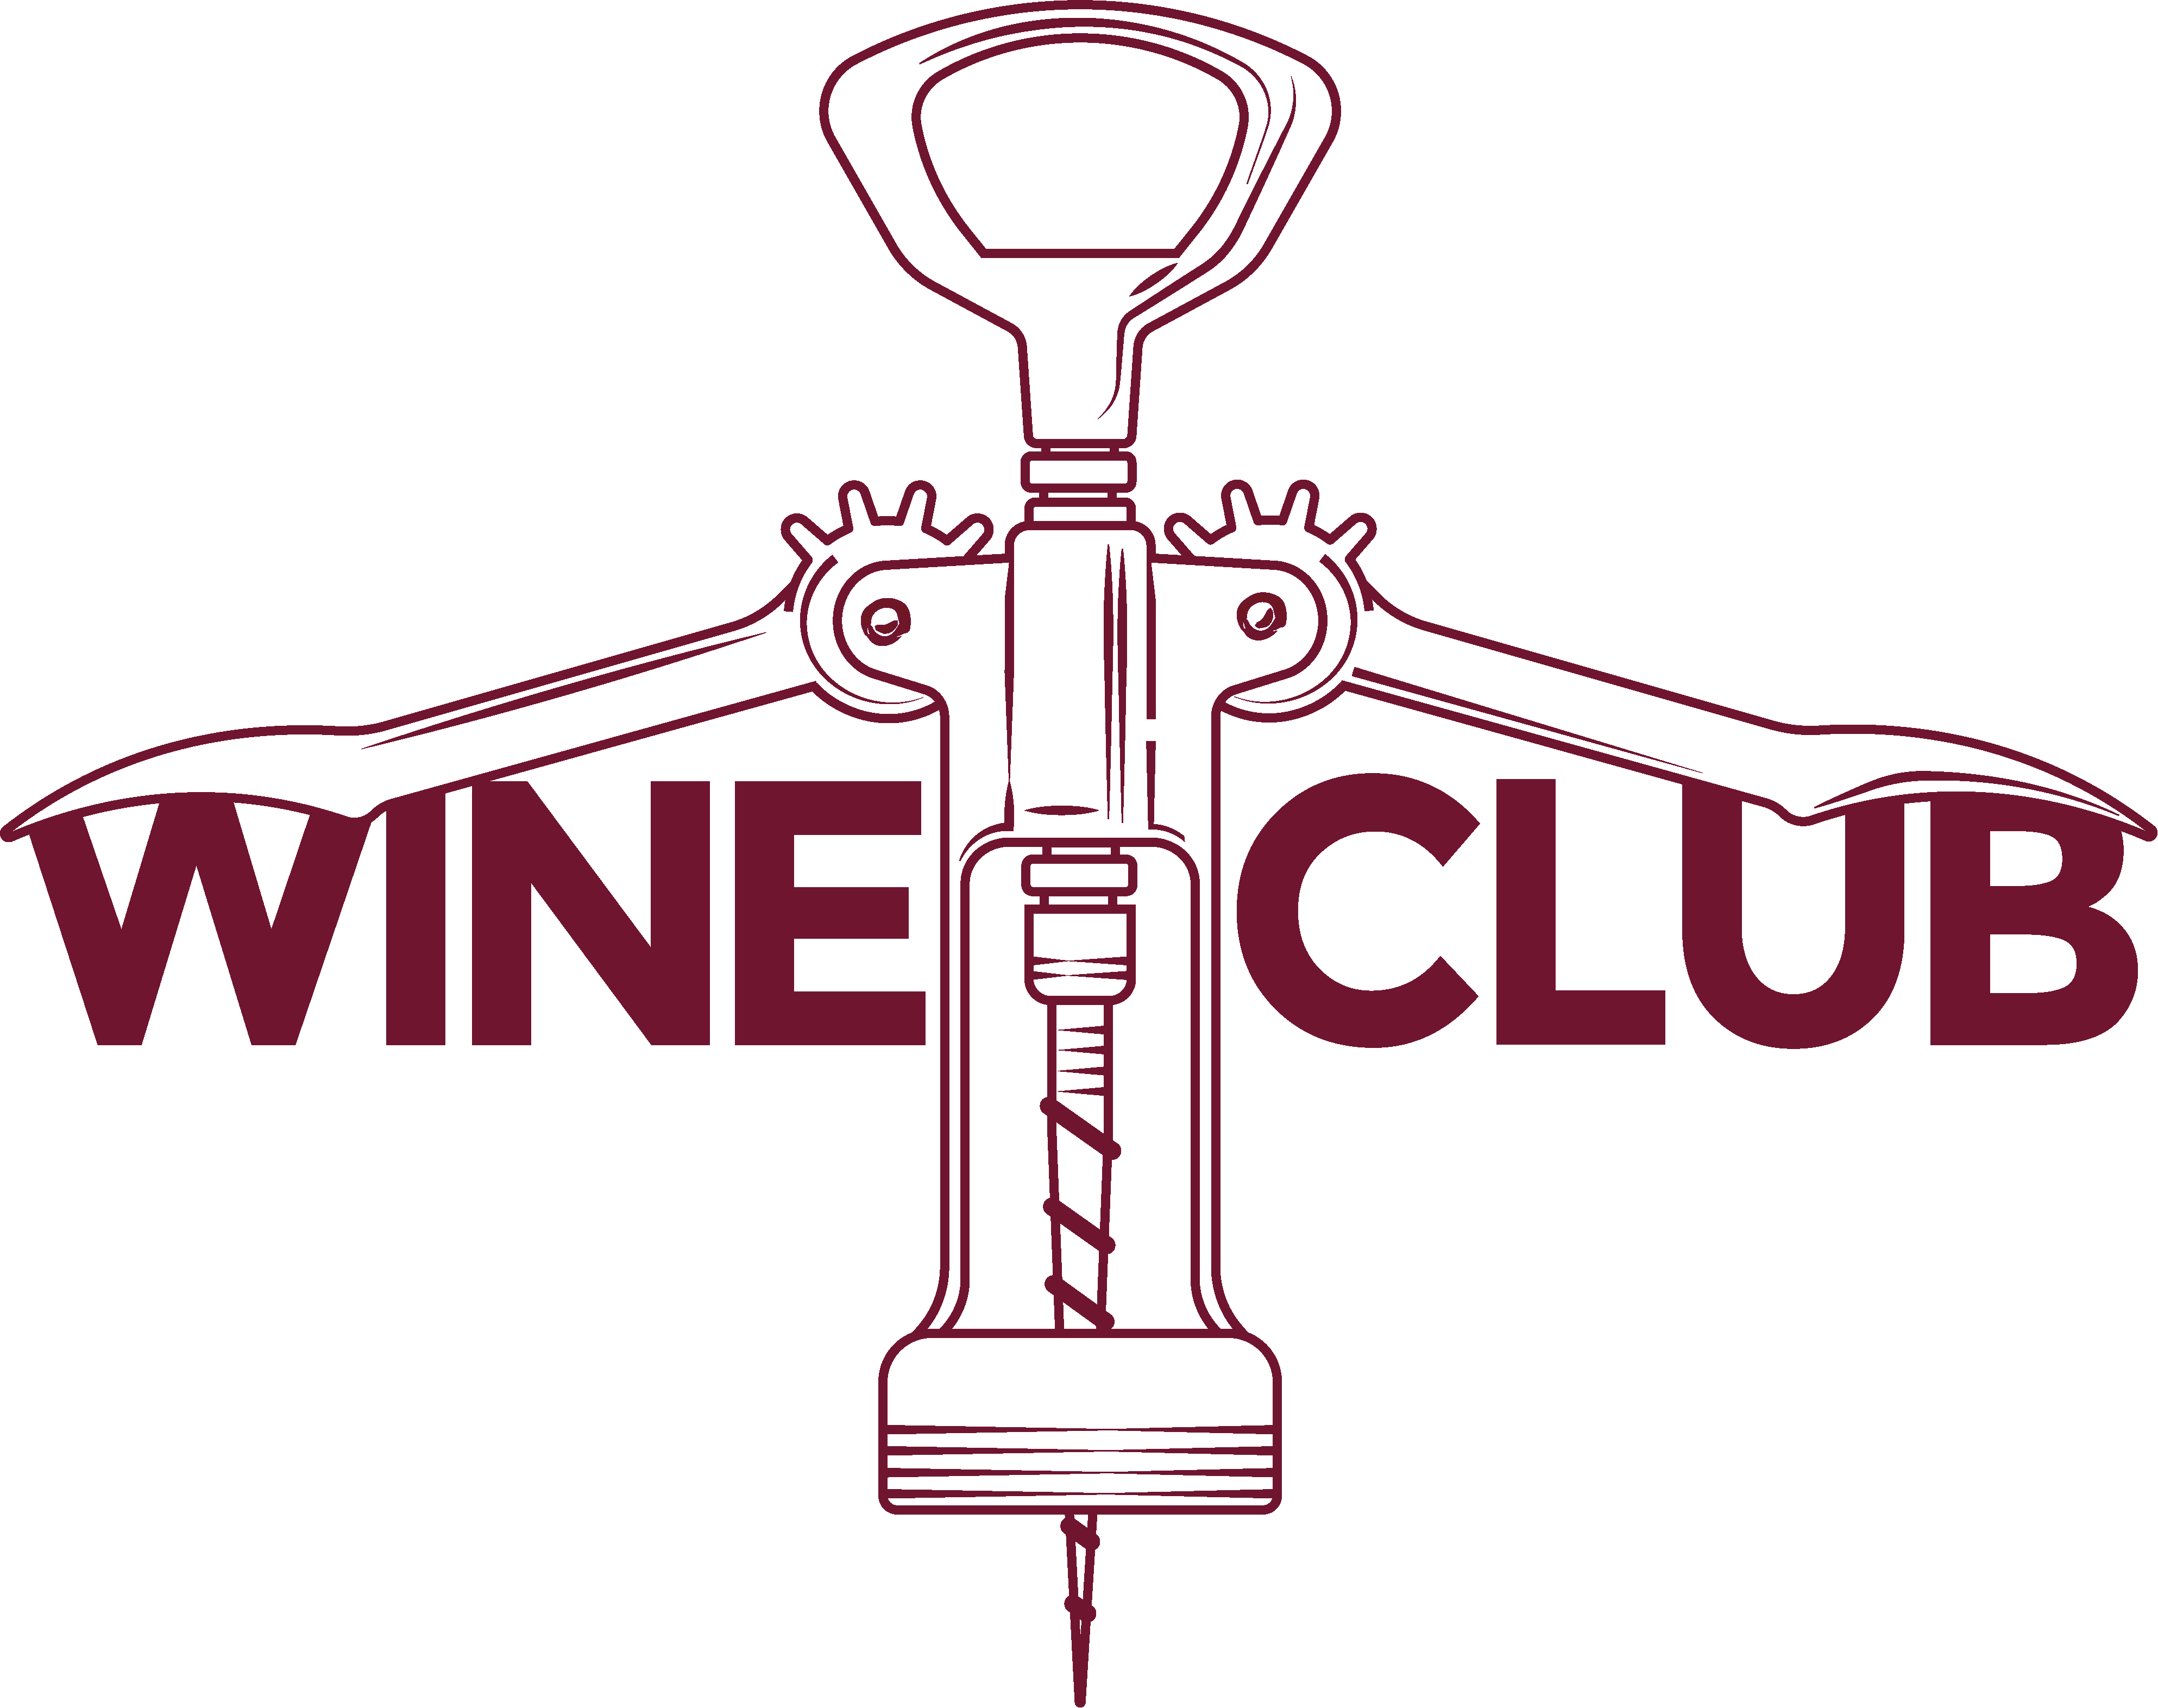 Wine Club logo logo design by logo designer Core Creative & Artwork Ltd. for your inspiration and for the worlds largest logo competition